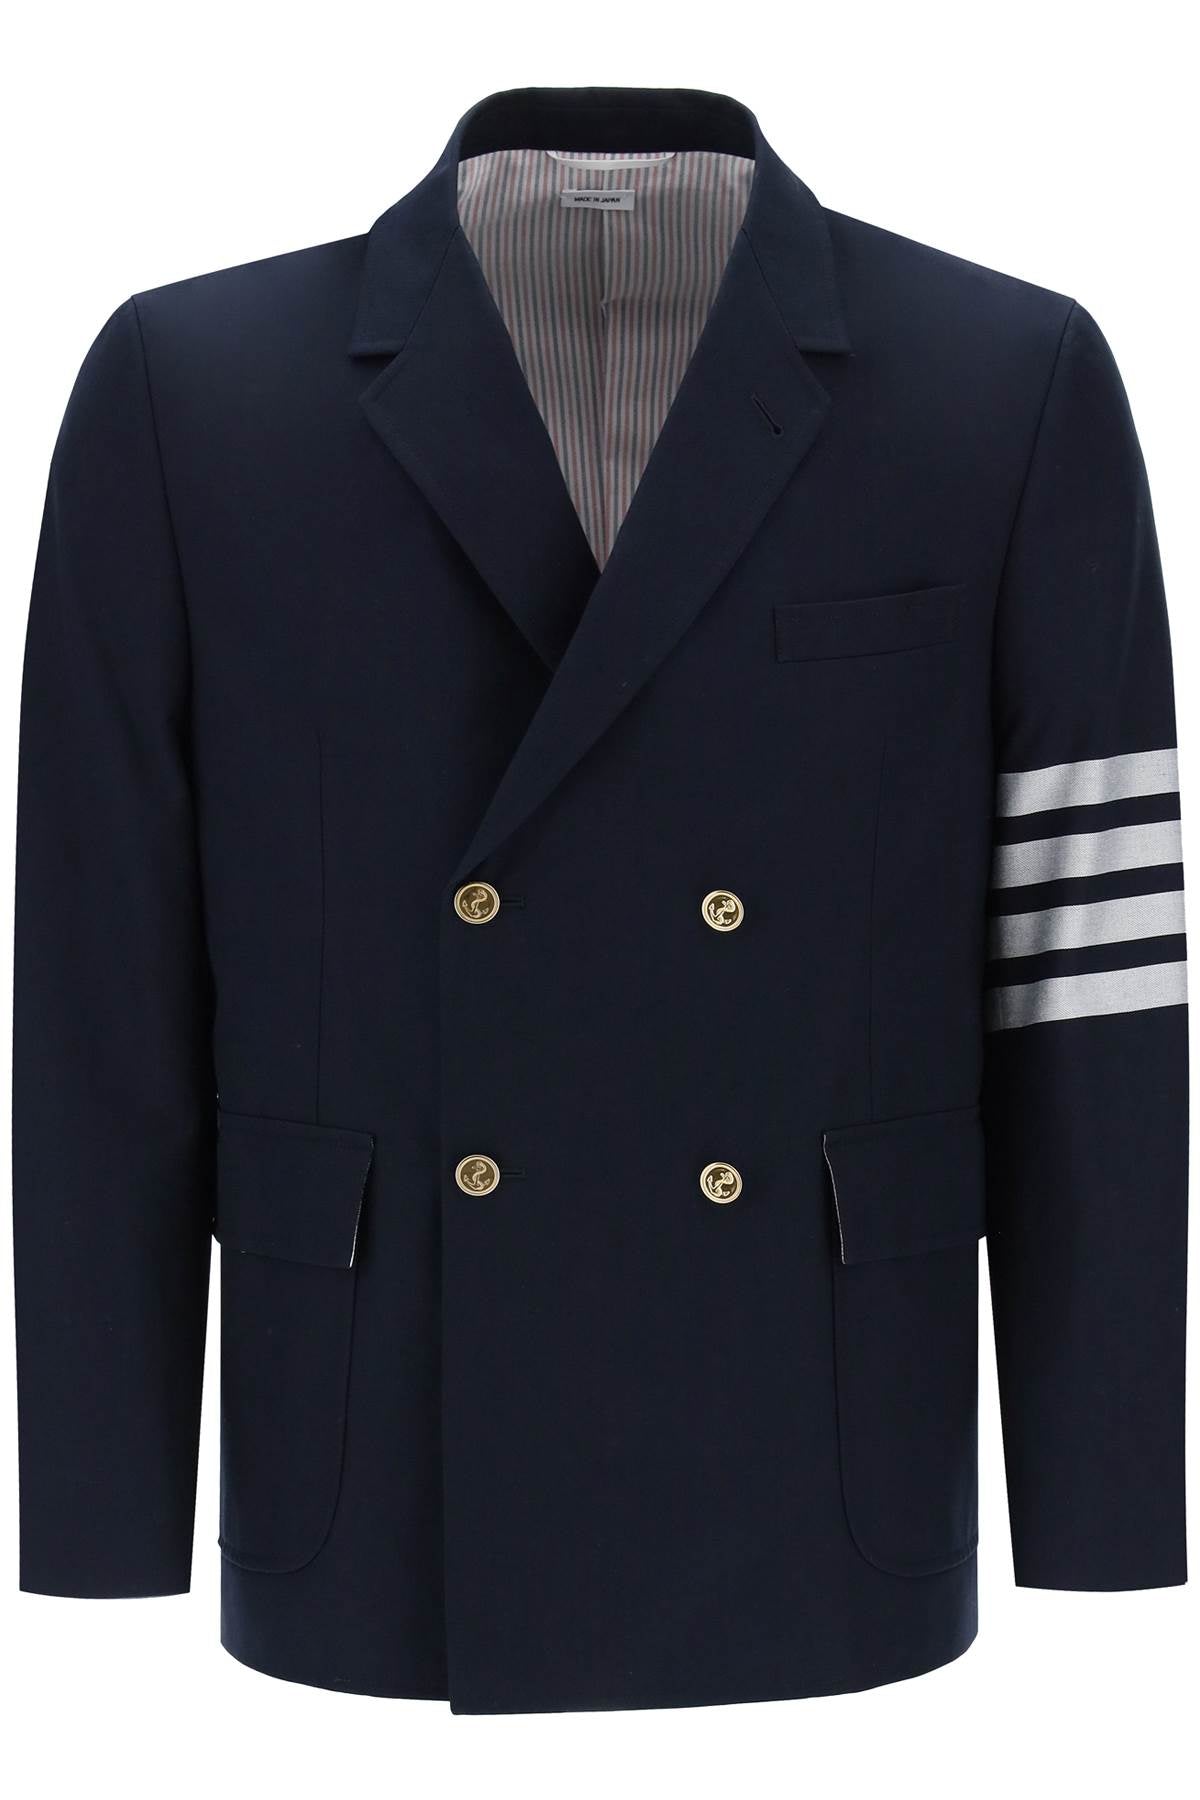 Thom browne 4-bar double-breasted jacket-0